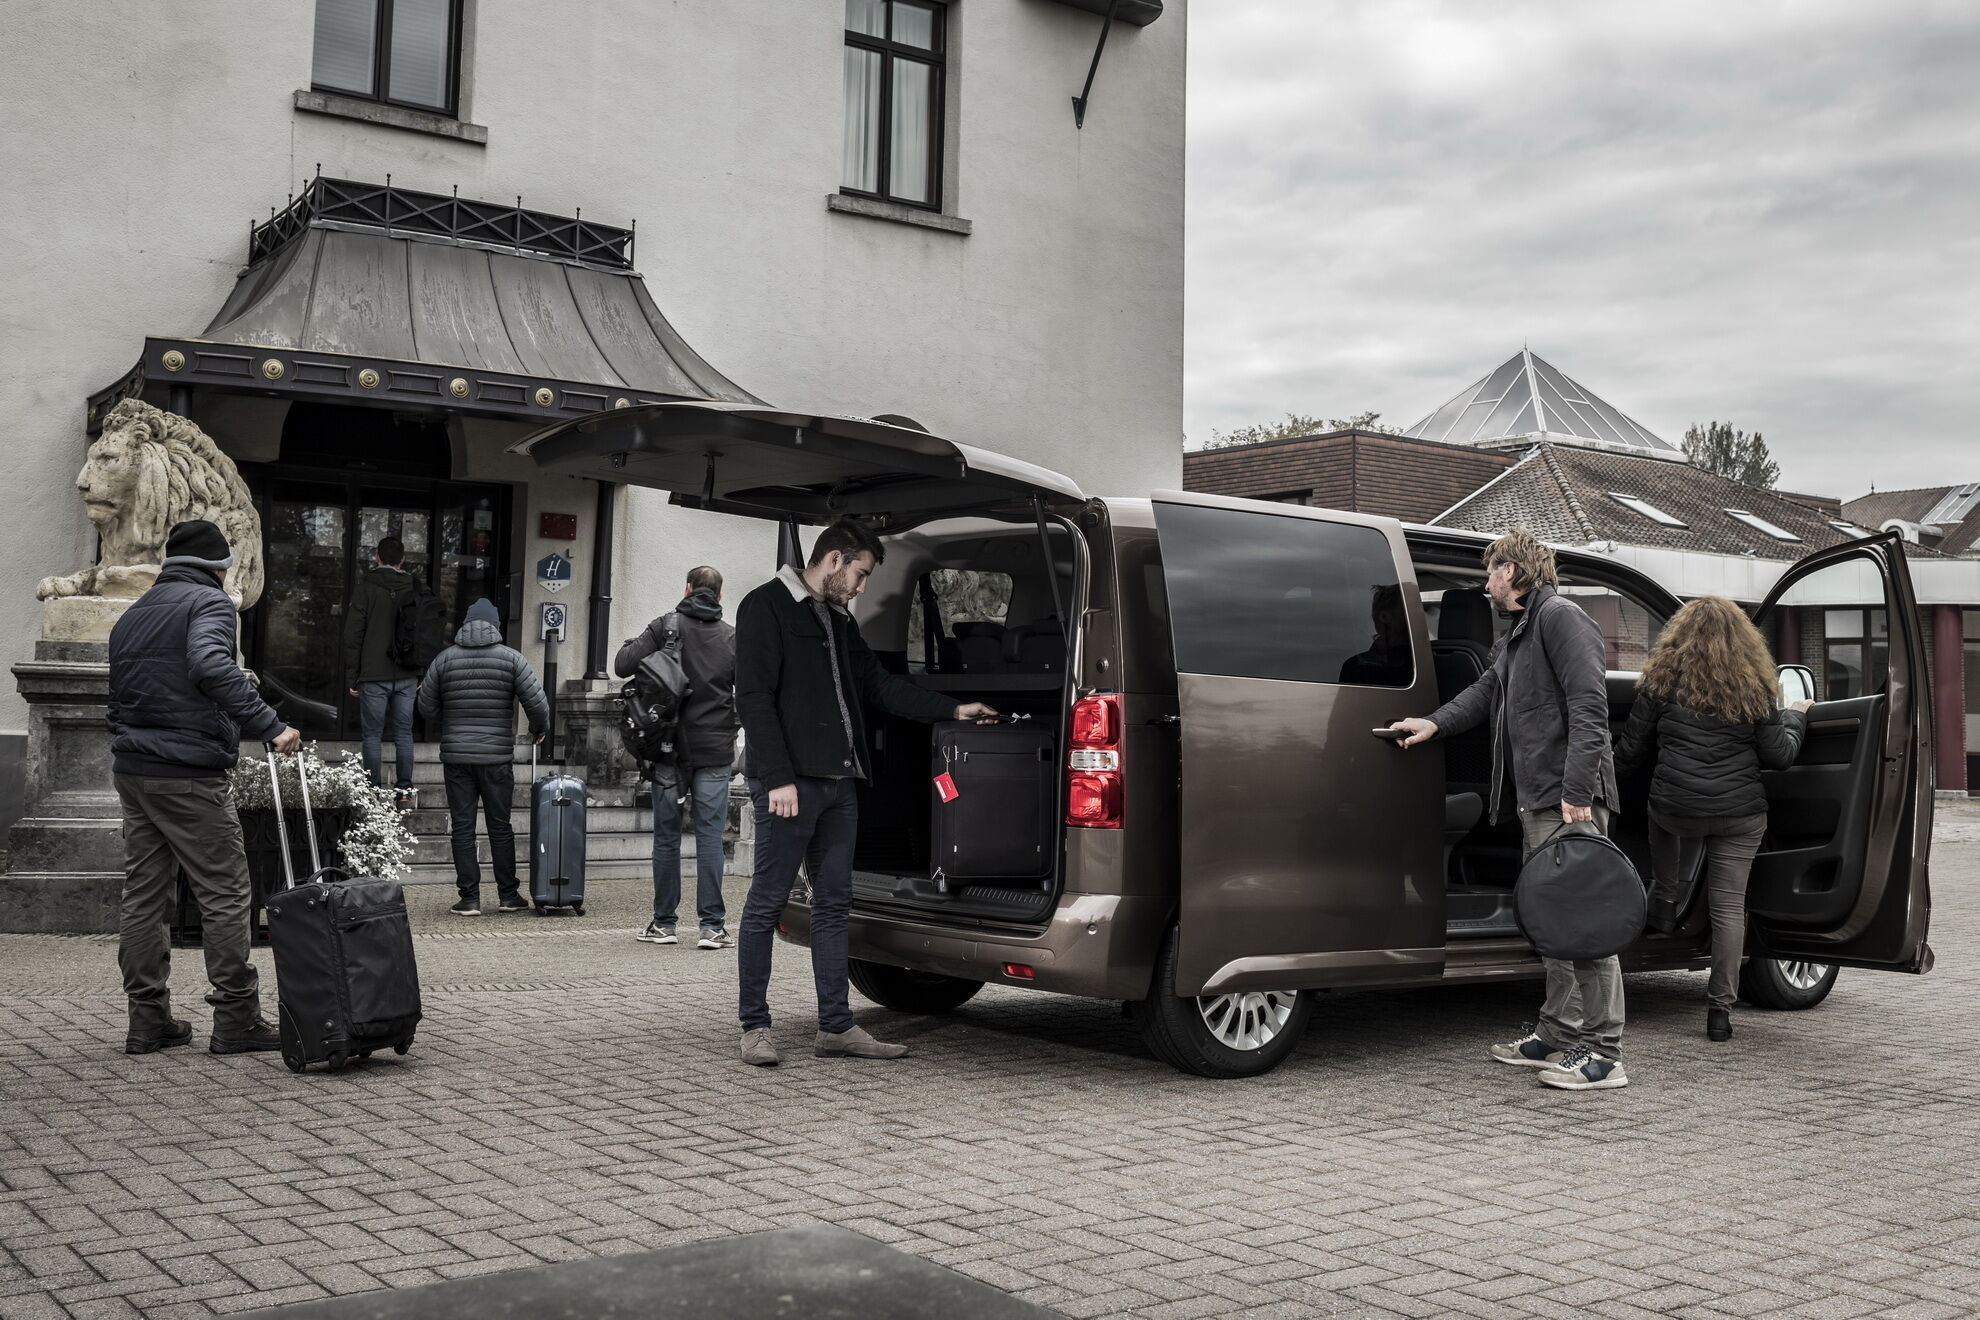 Toyota ProAce Verso Electric